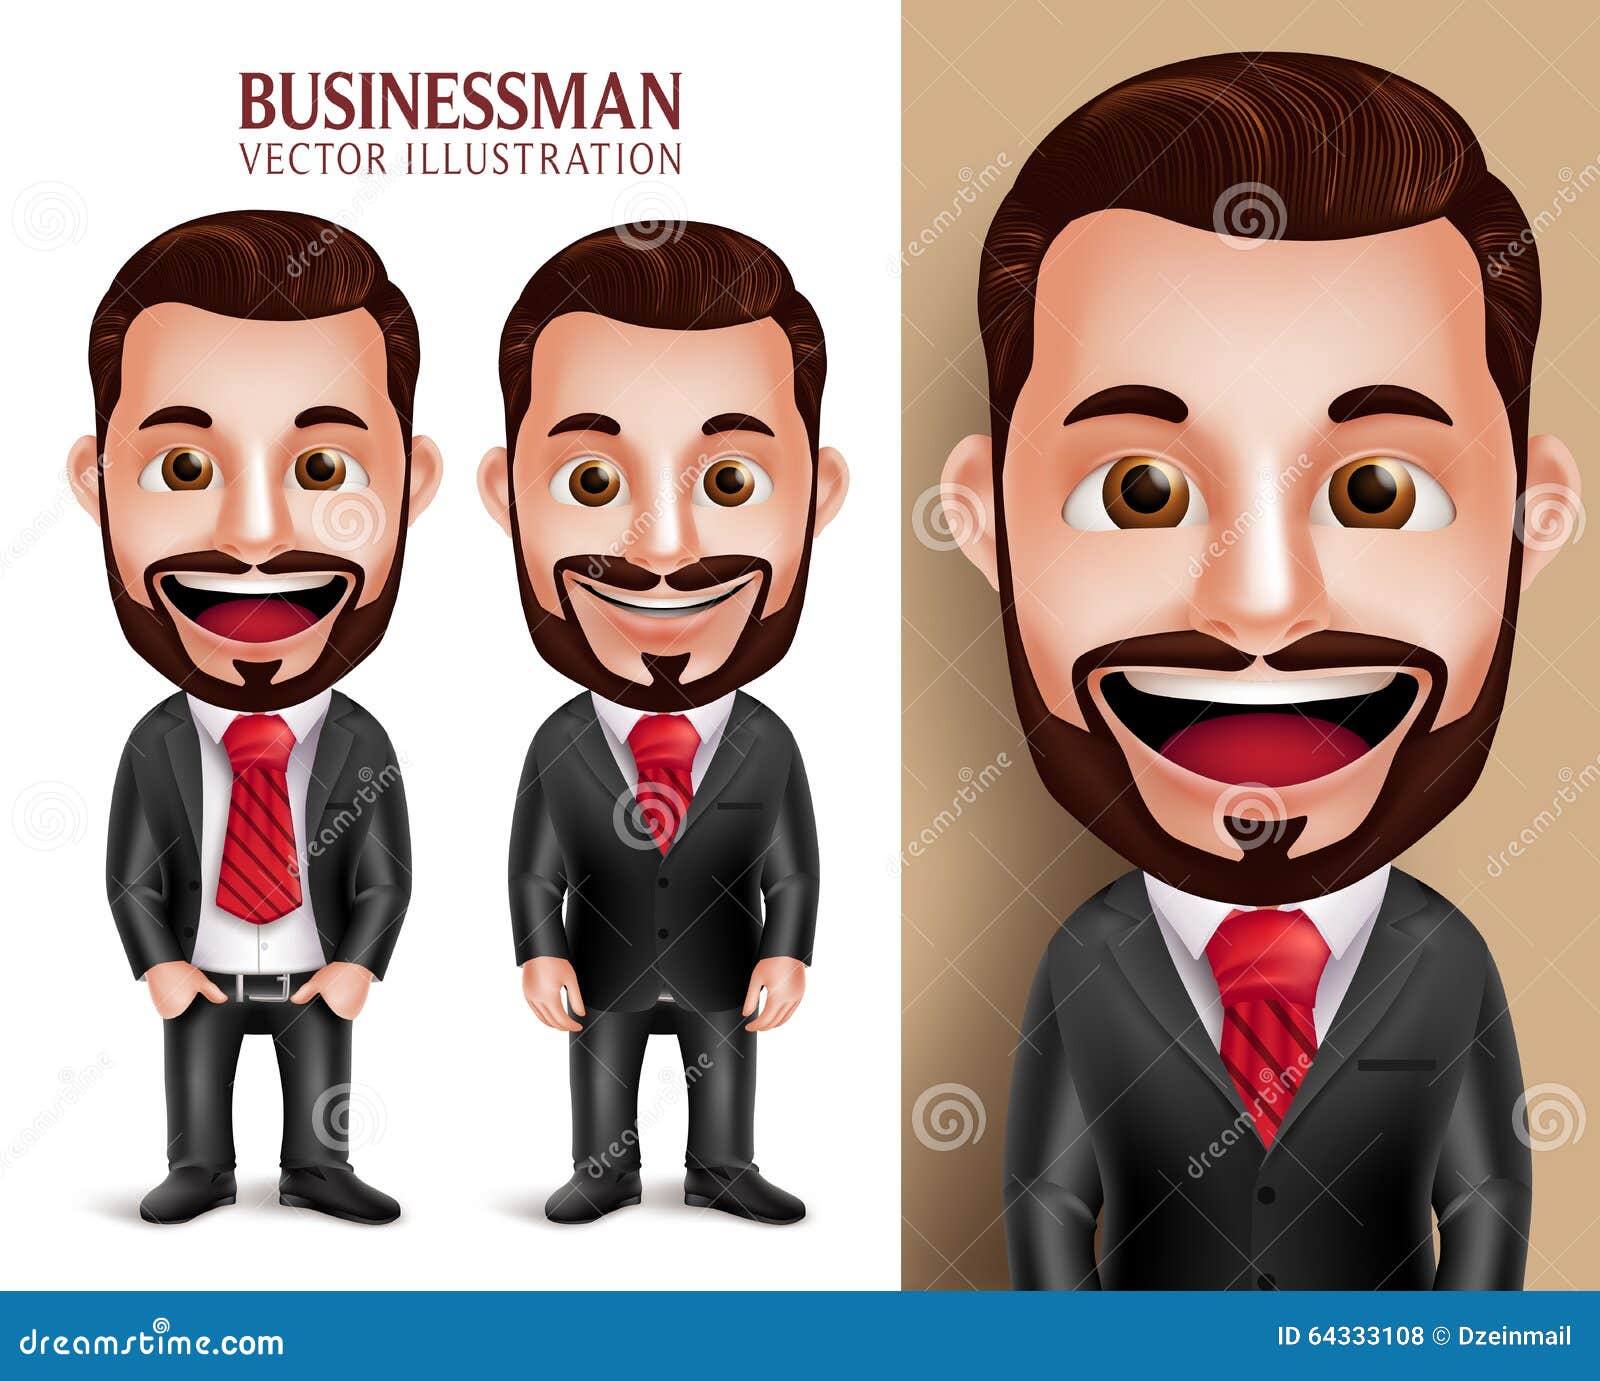 professional business man  character happy in attractive corporate attire